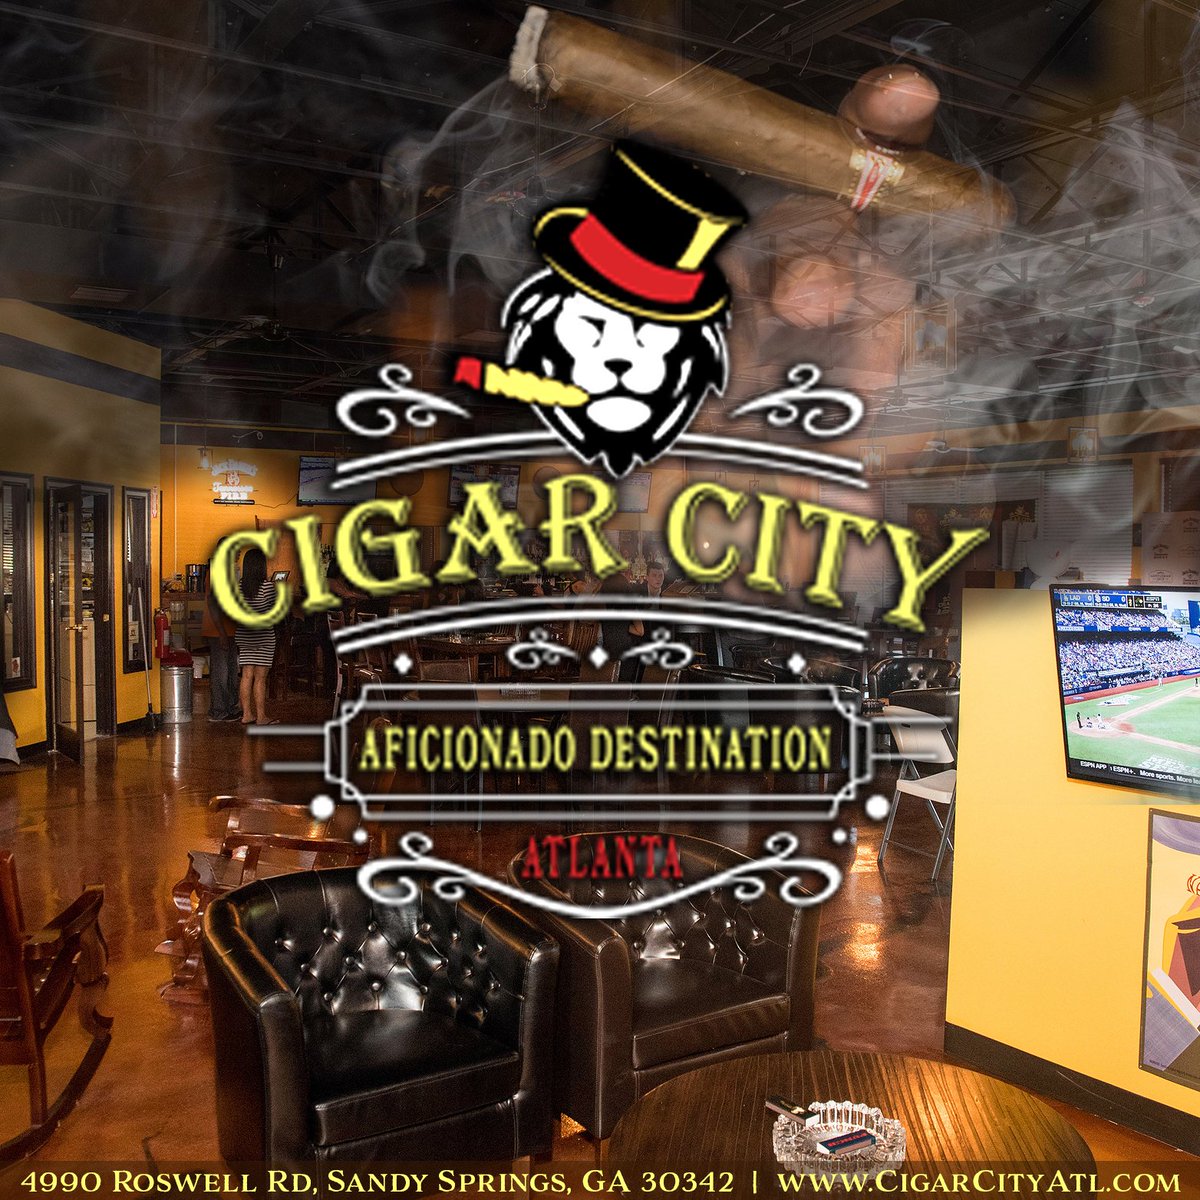 Cigar City Atl is your new favorite place for cigars, cocktails, food and more! | 4990 Roswell Rd, Sandy Springs, GA 30342
#CigarLounge #AtlParties #CigarCulture #AtlNightlife